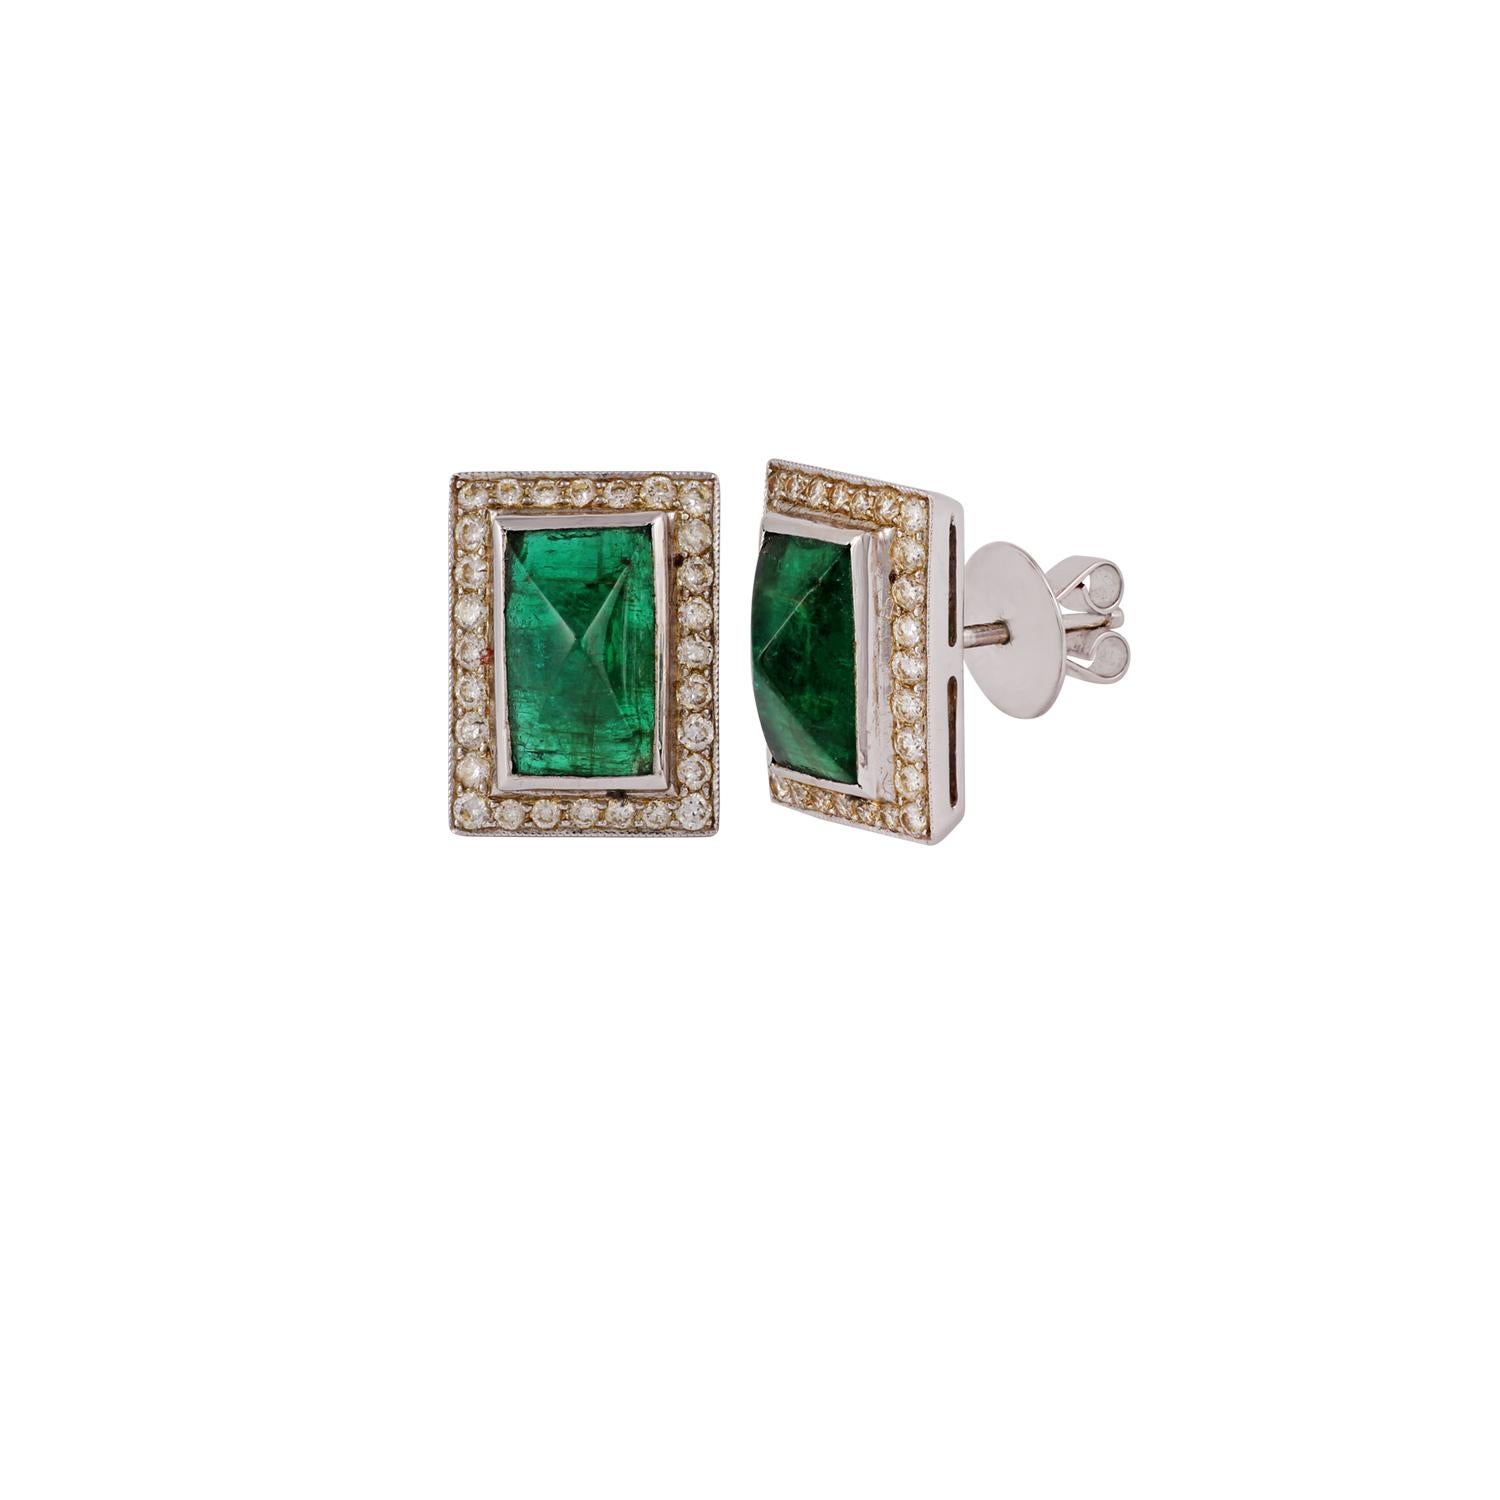 Contemporary 7.06 Carat Zambian Emerald and Diamond Stud Earrings  in 18 Karat White Gold For Sale